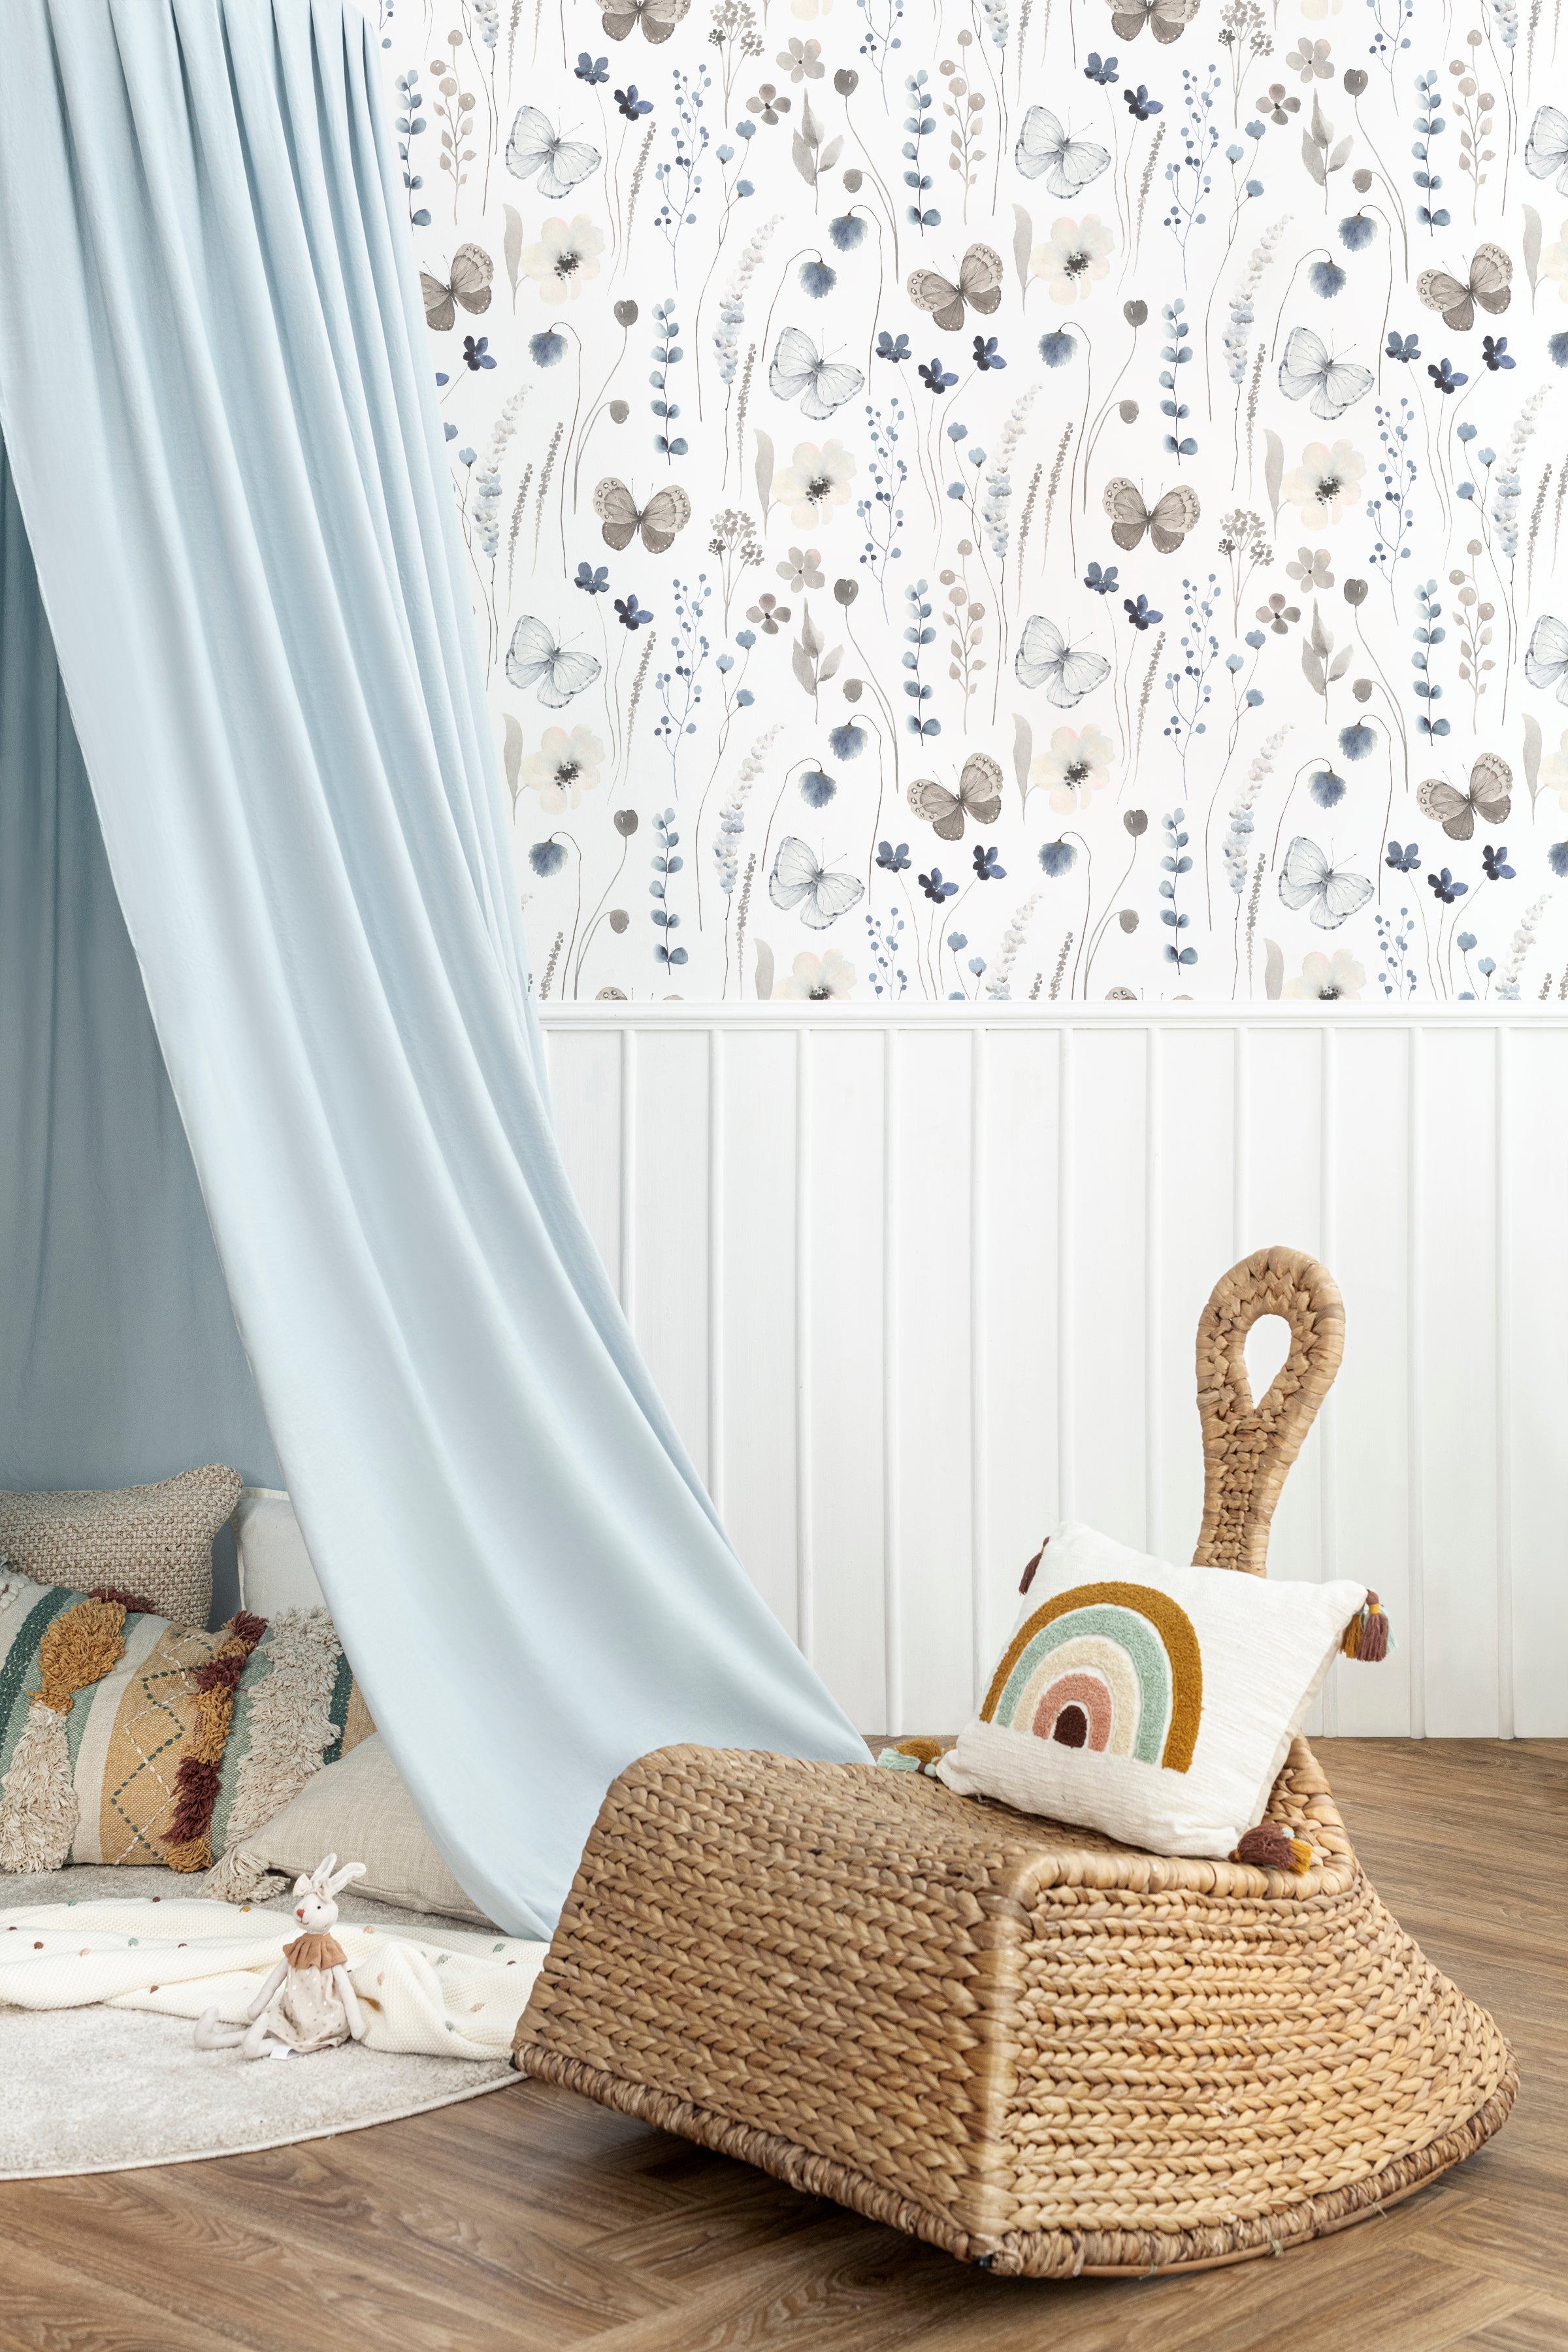 Cozy nook in a room adorned with Soft Flutter Wallpaper, which displays an elegant botanical and butterfly pattern in soft blues and grays. A light blue curtain partly reveals a textured wicker lounge chair with colorful pillows, situated against a half paneled white and wallpapered wall